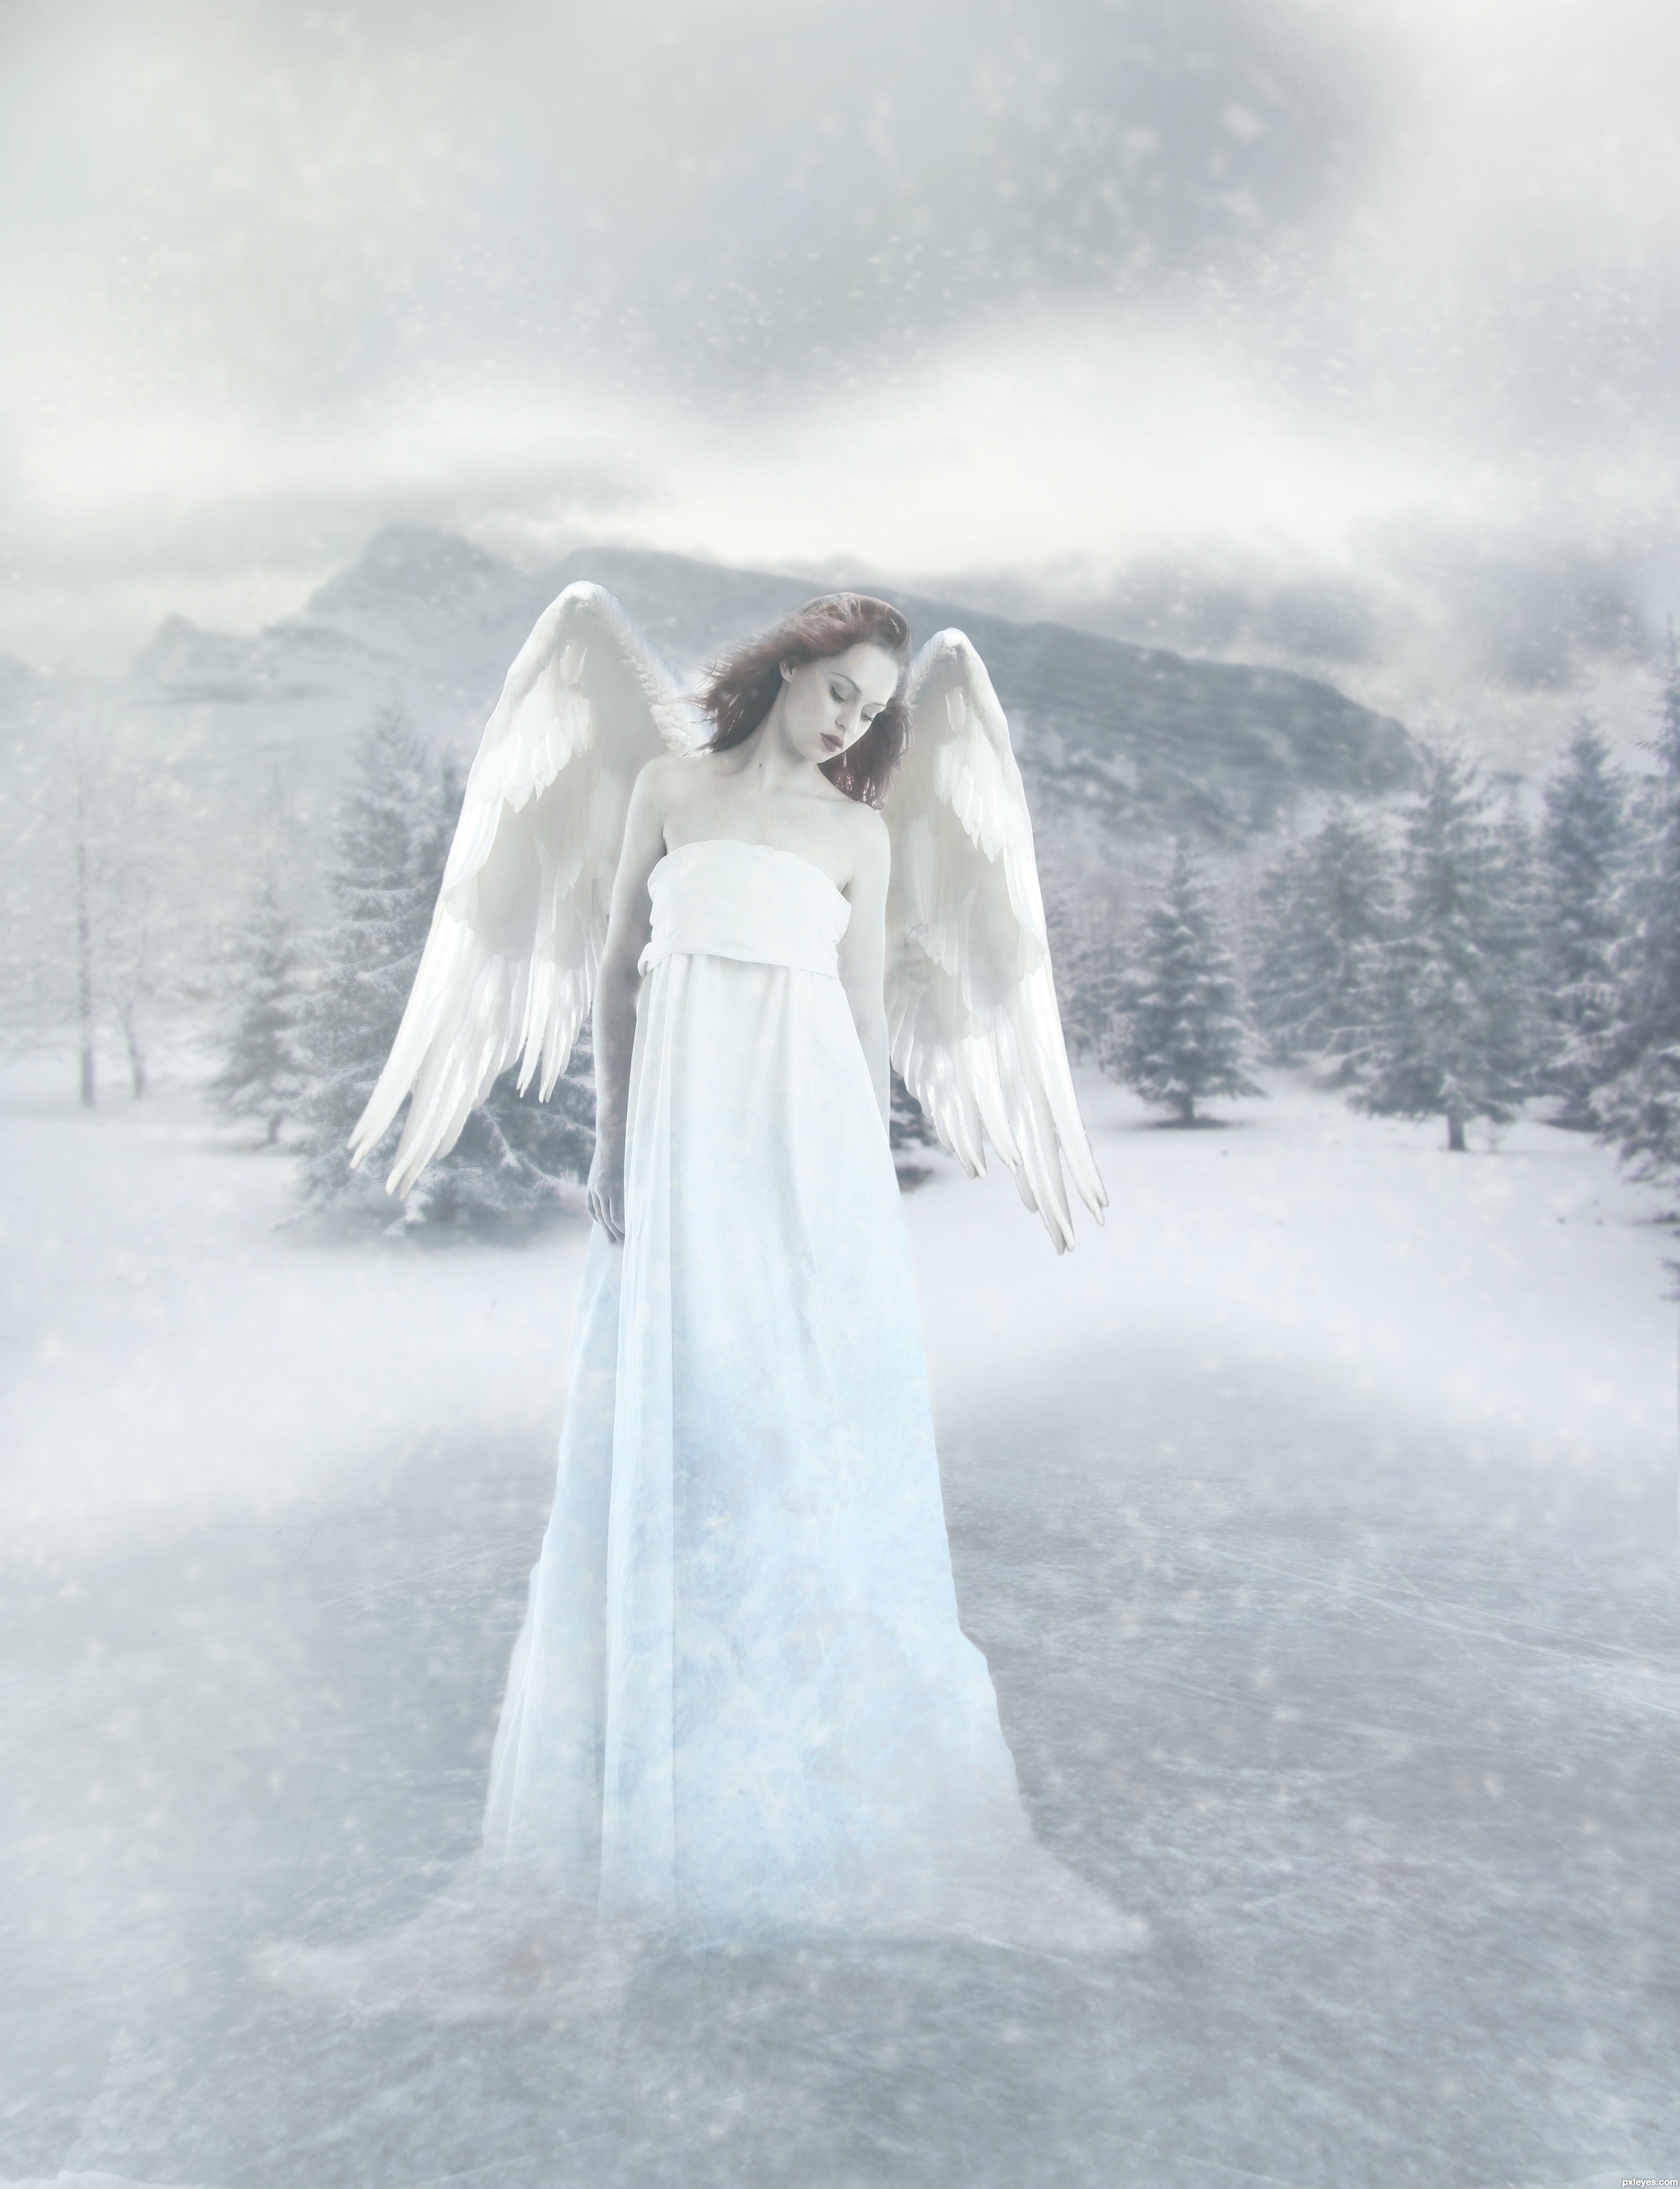 Angel In The Snow picture, by TwilightMuse for: ps tournament 4 round 1 pho...